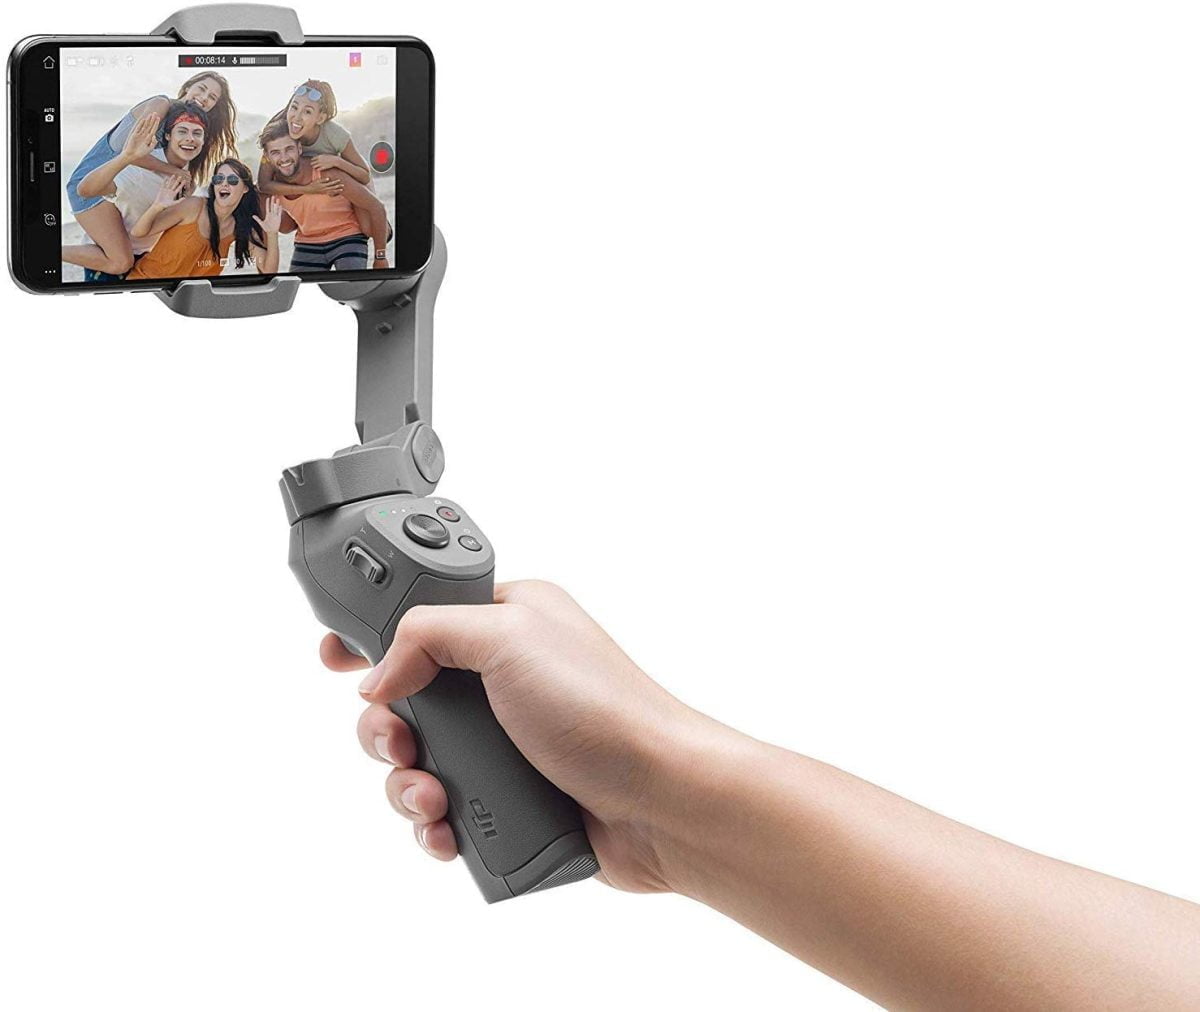 61J39Zabhql. Ac Sl1500 Dji &Lt;A Href=&Quot;Https://Www.dji.com/Ae/Osmo-Mobile-3?From=Store-Product-Page&Quot;&Gt;Osmo Mobile 3 Official Product Page&Lt;/A&Gt; &Lt;H1 Class=&Quot;Product-Name Logo&Quot;&Gt; Osmo Mobile 3 Combo&Lt;/H1&Gt; &Lt;Div Class=&Quot;Product-Cover&Quot;&Gt; &Lt;Img Class=&Quot;Alignnone Size-Medium Wp-Image-5354&Quot; Src=&Quot;Https://Lablaab.com/Wp-Content/Uploads/2019/11/Annotation-2019-11-05-113239-300X92.Jpg&Quot; Alt=&Quot;&Quot; Width=&Quot;300&Quot; Height=&Quot;92&Quot; /&Gt; 1. Slow Motion Is Currently Only Supported By Ios Devices. 2. You Can Also Transition Between Portrait And Landscape Mode By Rotating The Roll Axis Manually. 3. Activate This Function In Settings. By Default, If You Press The M Button Once, You Can Quickly Switch Between Taking A Photo And Recording A Video. &Lt;/Div&Gt; Dji Osmo Mobile 3 Combo Dji Osmo Mobile 3 Combo